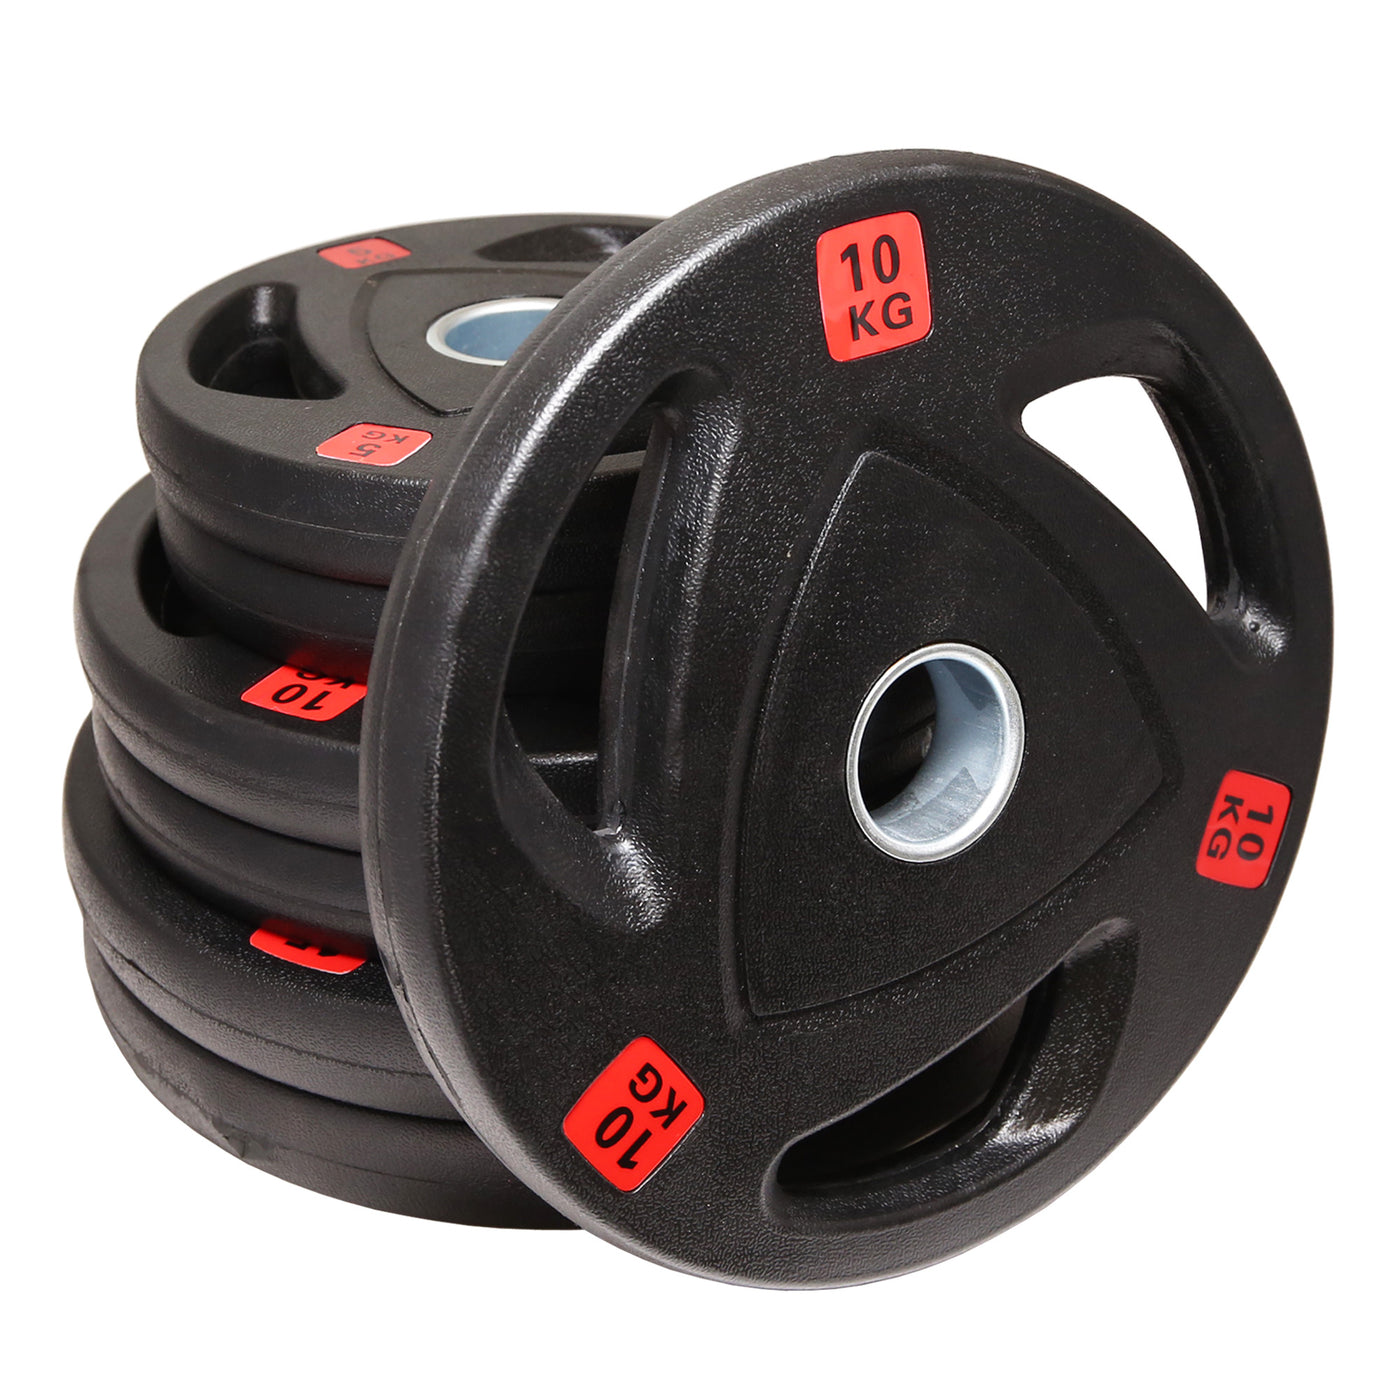 Olympic Barbell Weight Set 16kg, 36kg, 80kg Bundle - Tri-Grip Plates with 4ft or 7ft Olympic Barbell